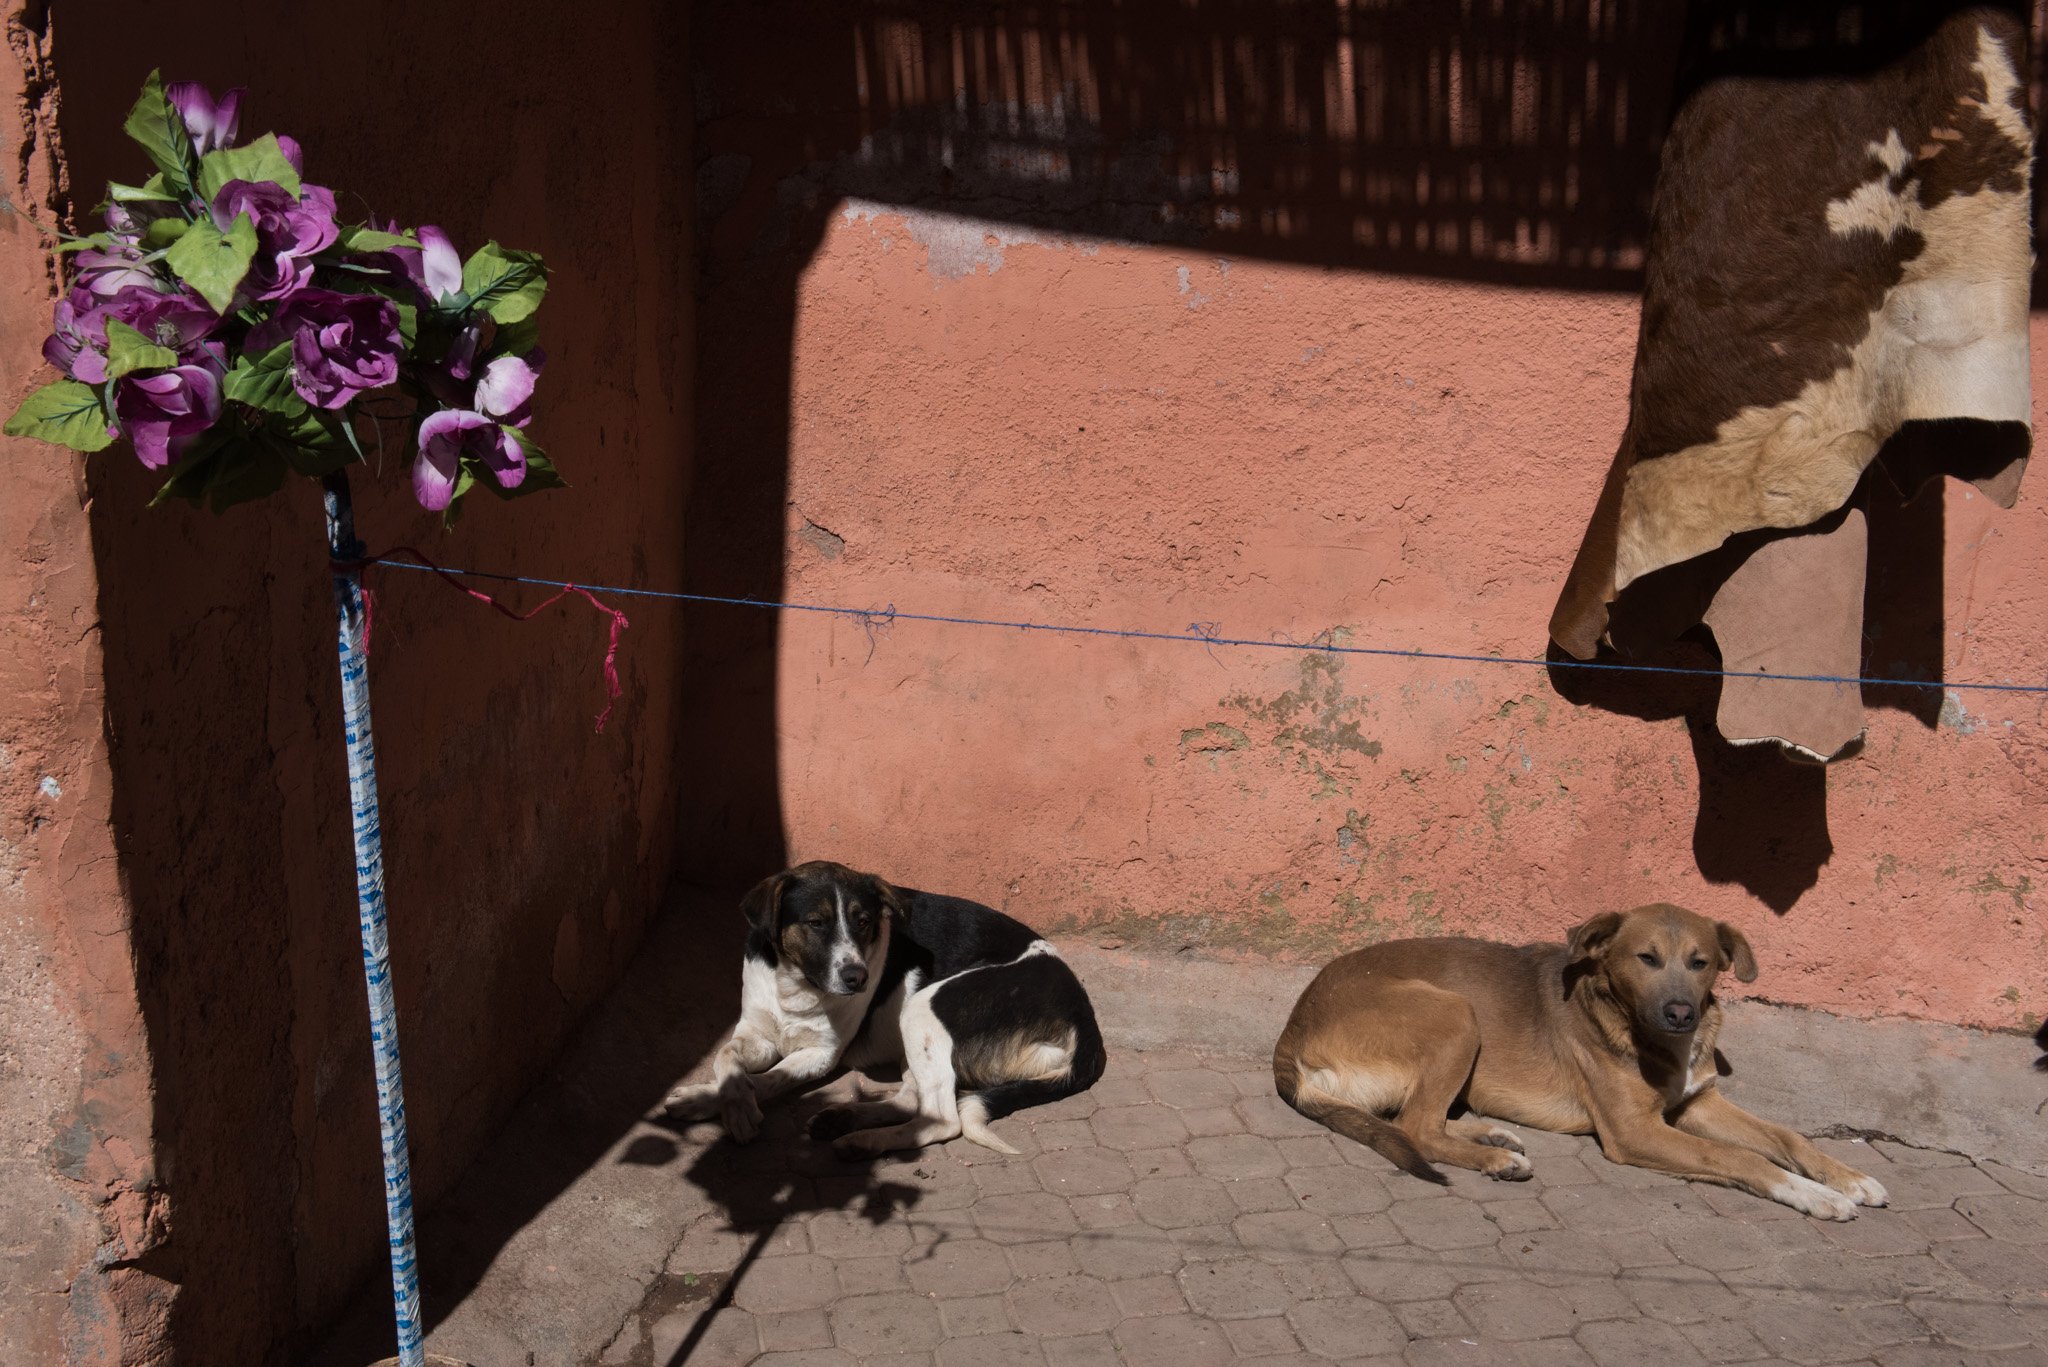    Morocco -  Marrakech    Dogs, flowers and hides   